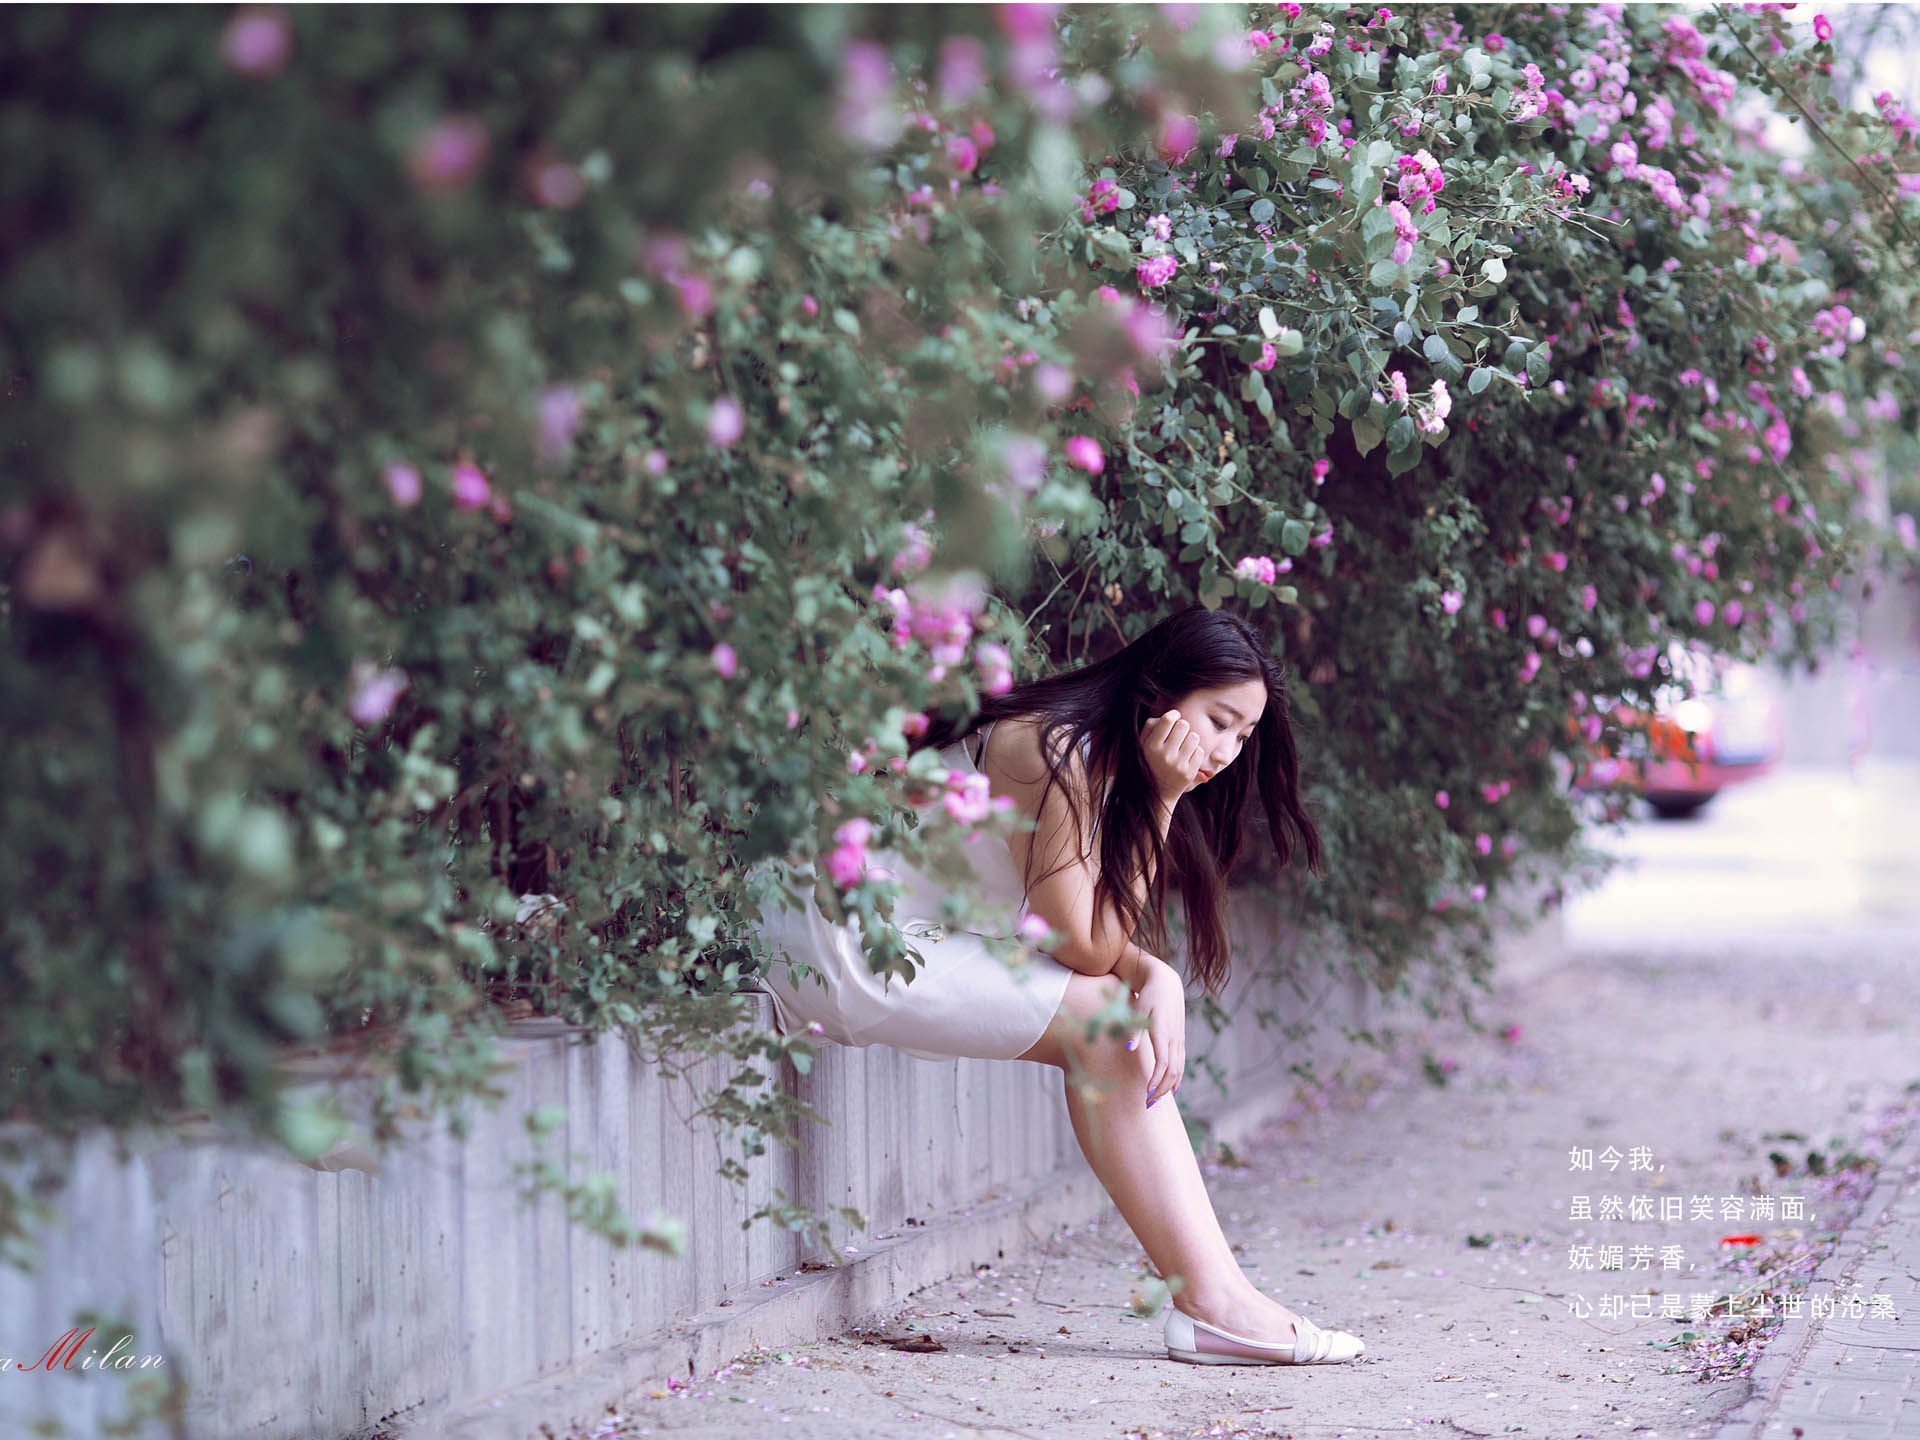 Beautiful girl with roses flower HD wallpapers #4 - 1920x1440